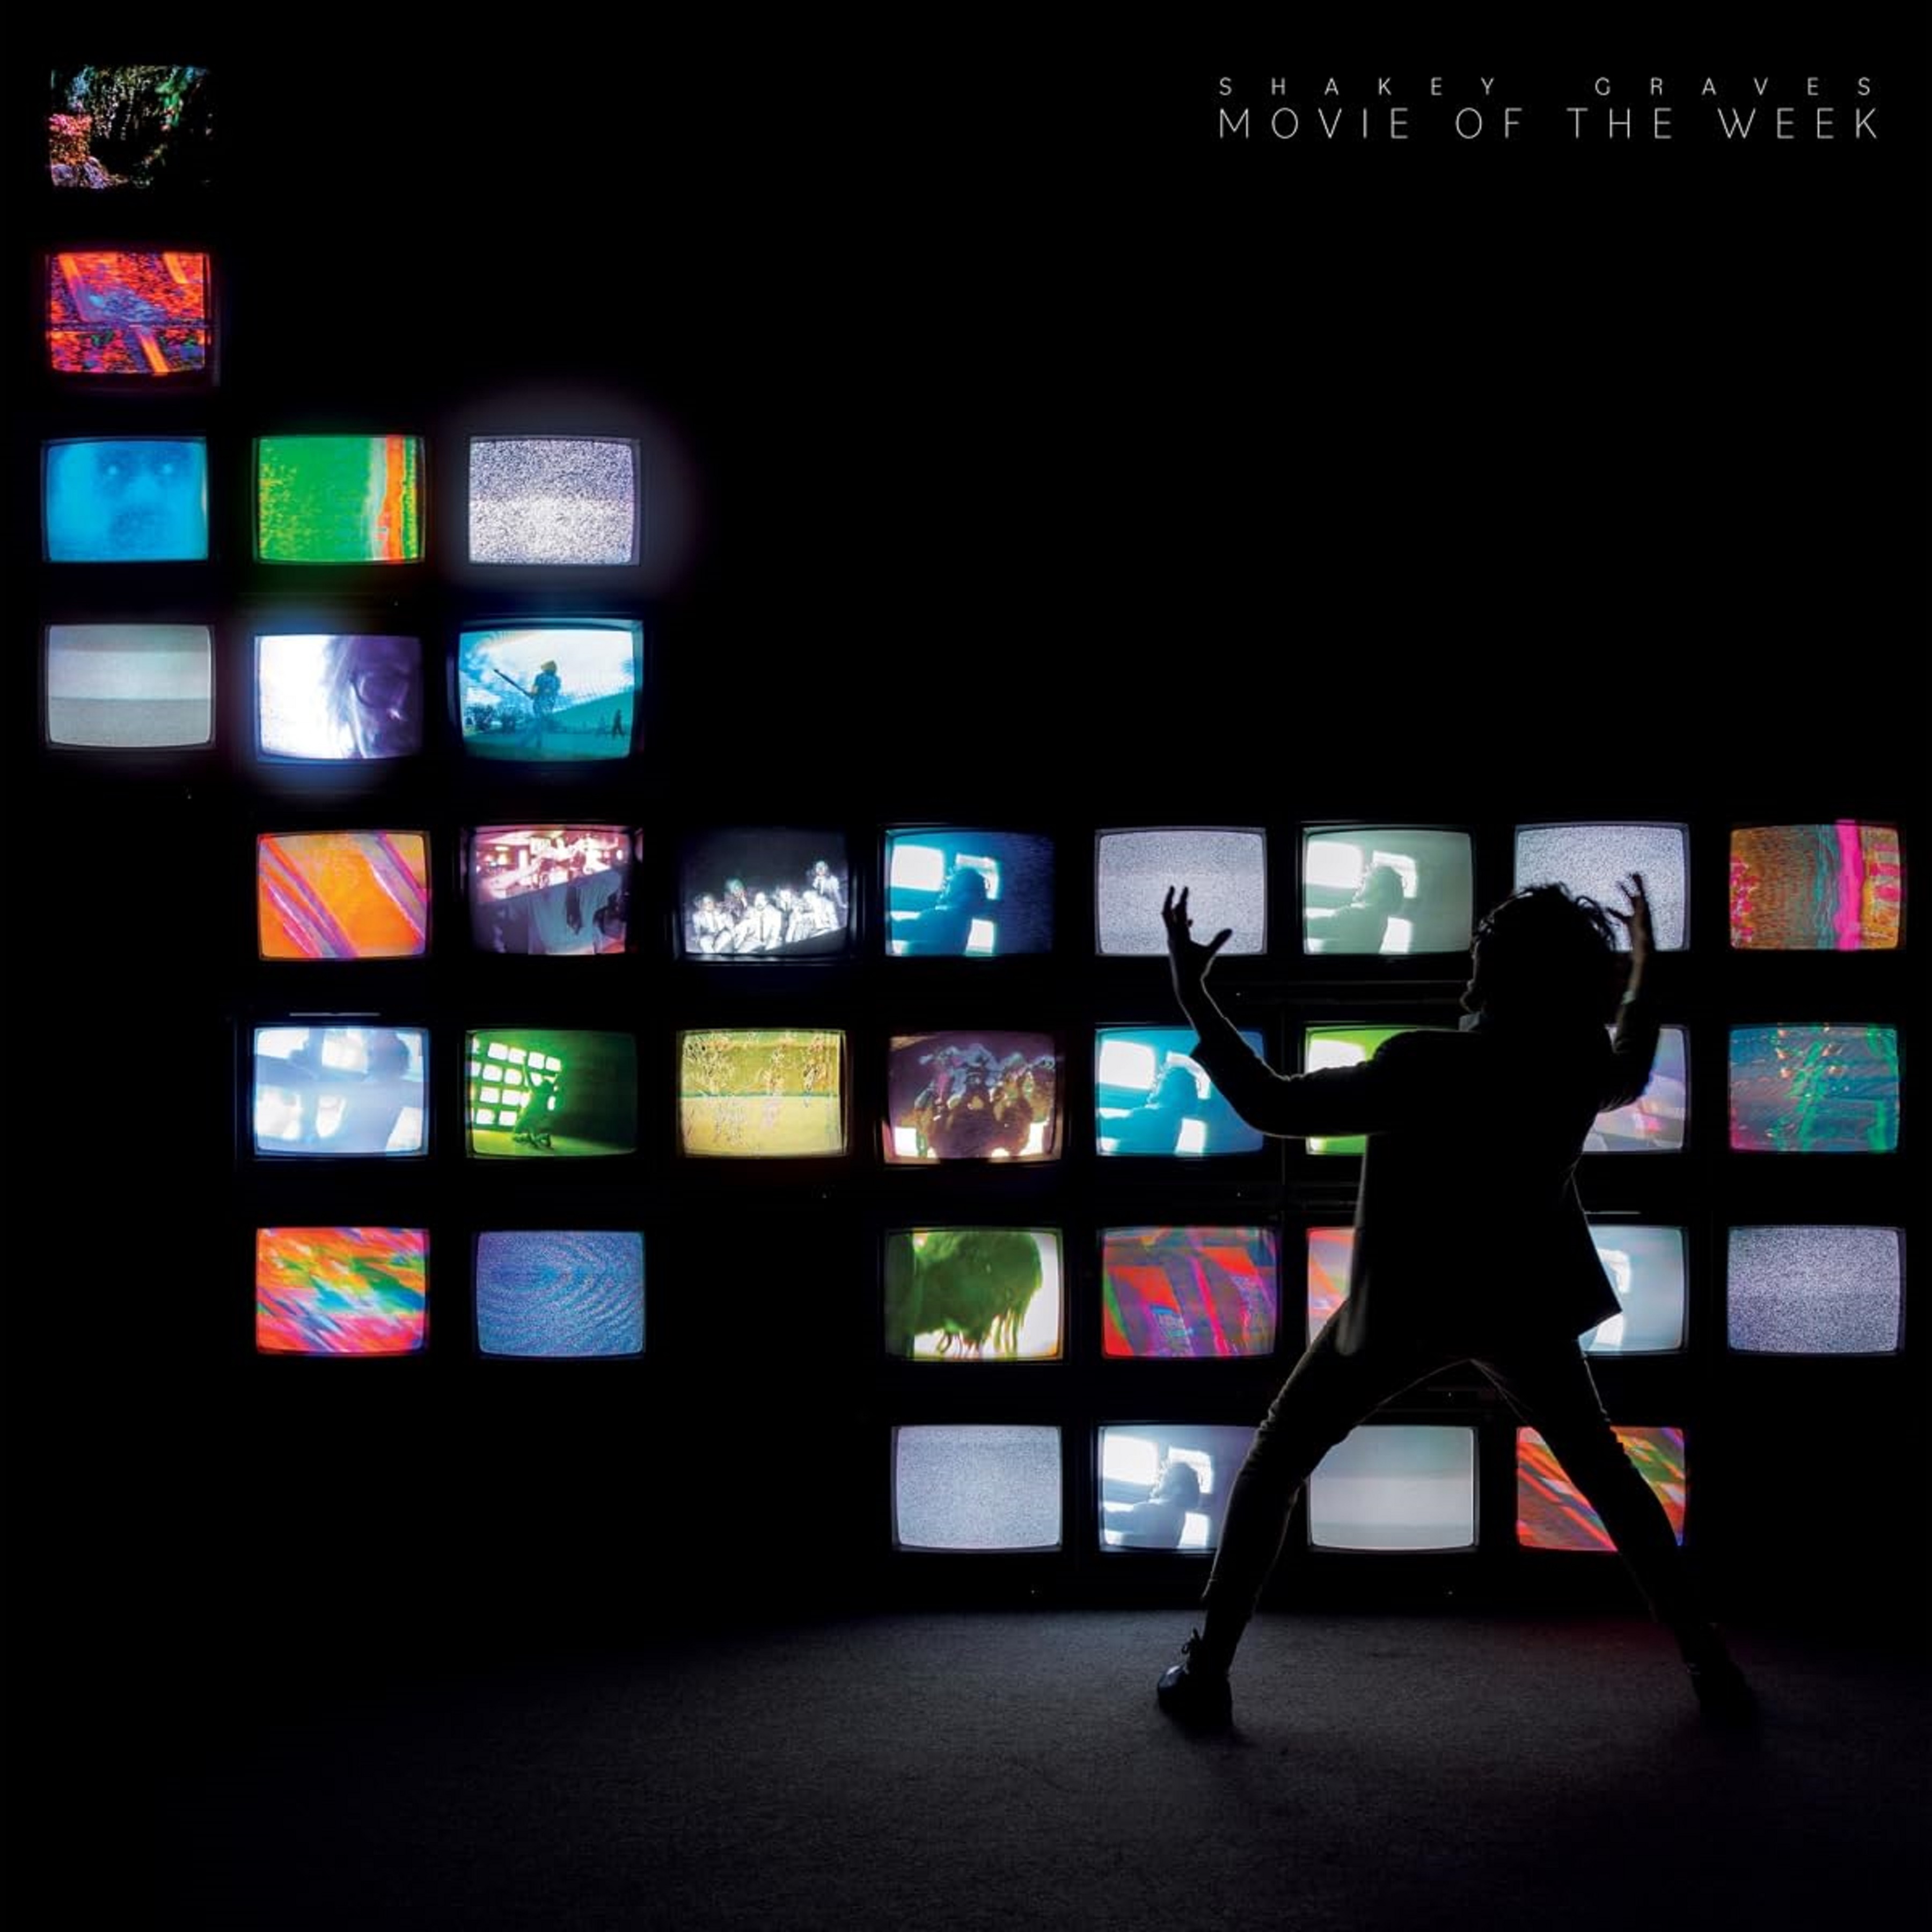 Shakey Graves' new LP 'Movie of the Week' out now